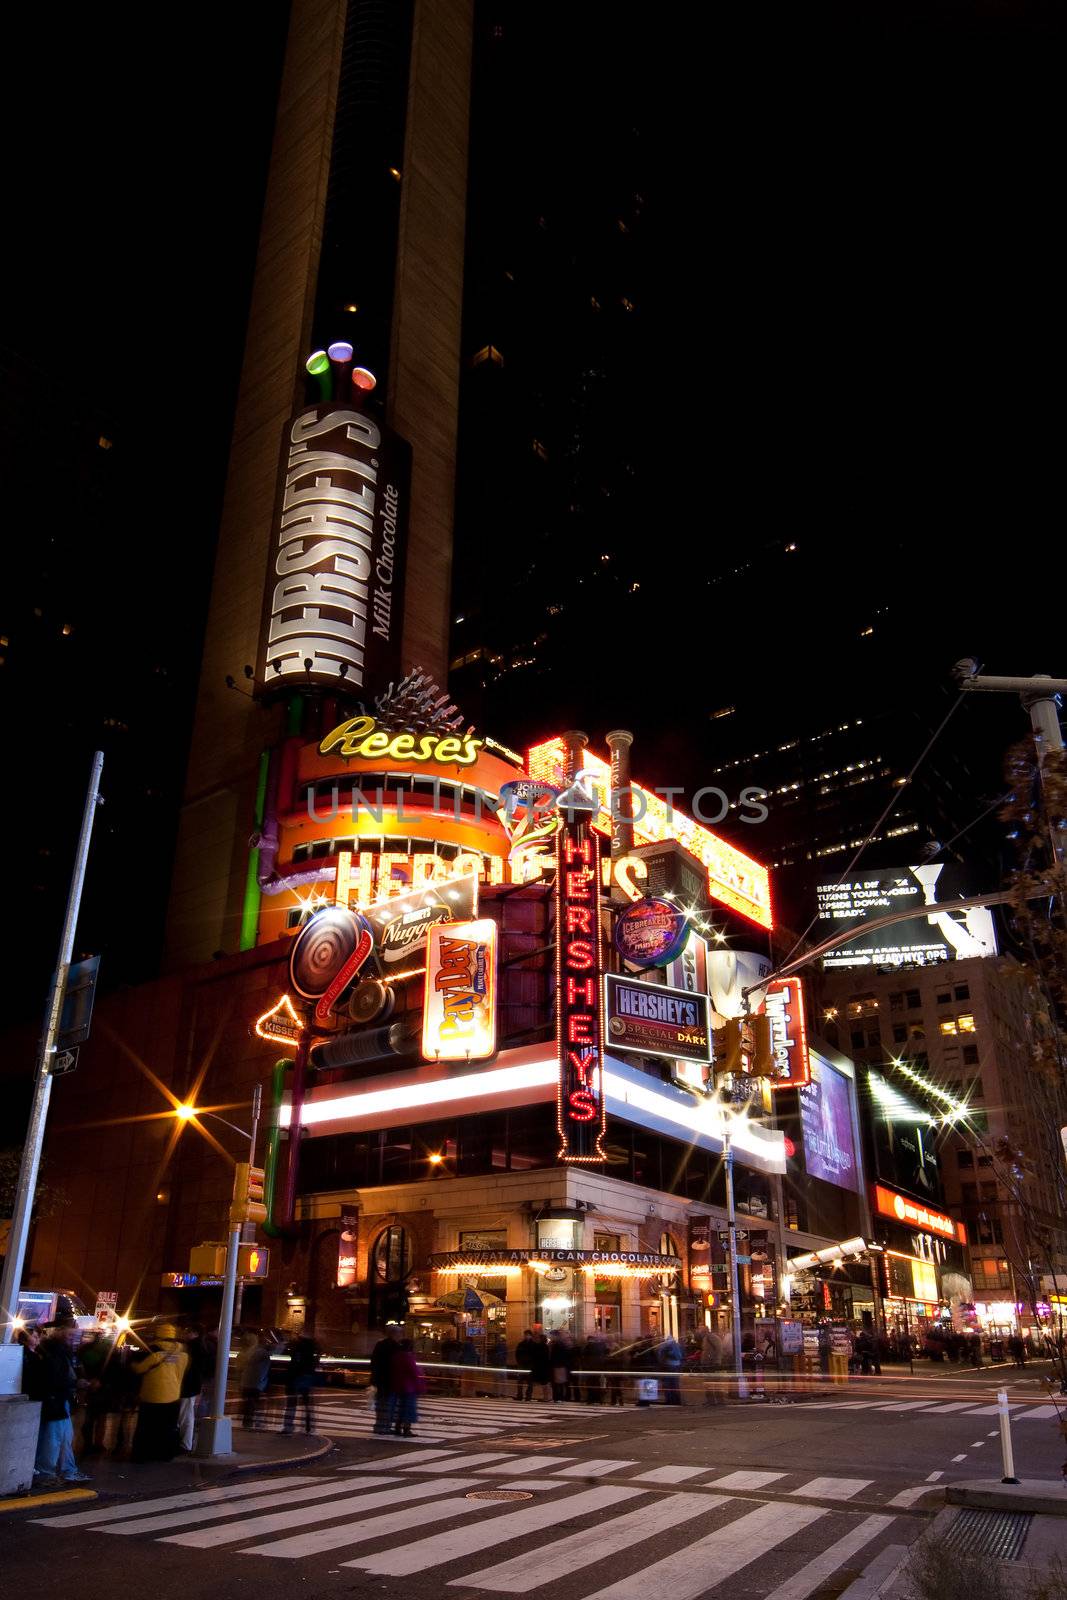 Hershey's, The Great American Chocolate Company, Candy store by night in Times Square, Manhattan, New York City.